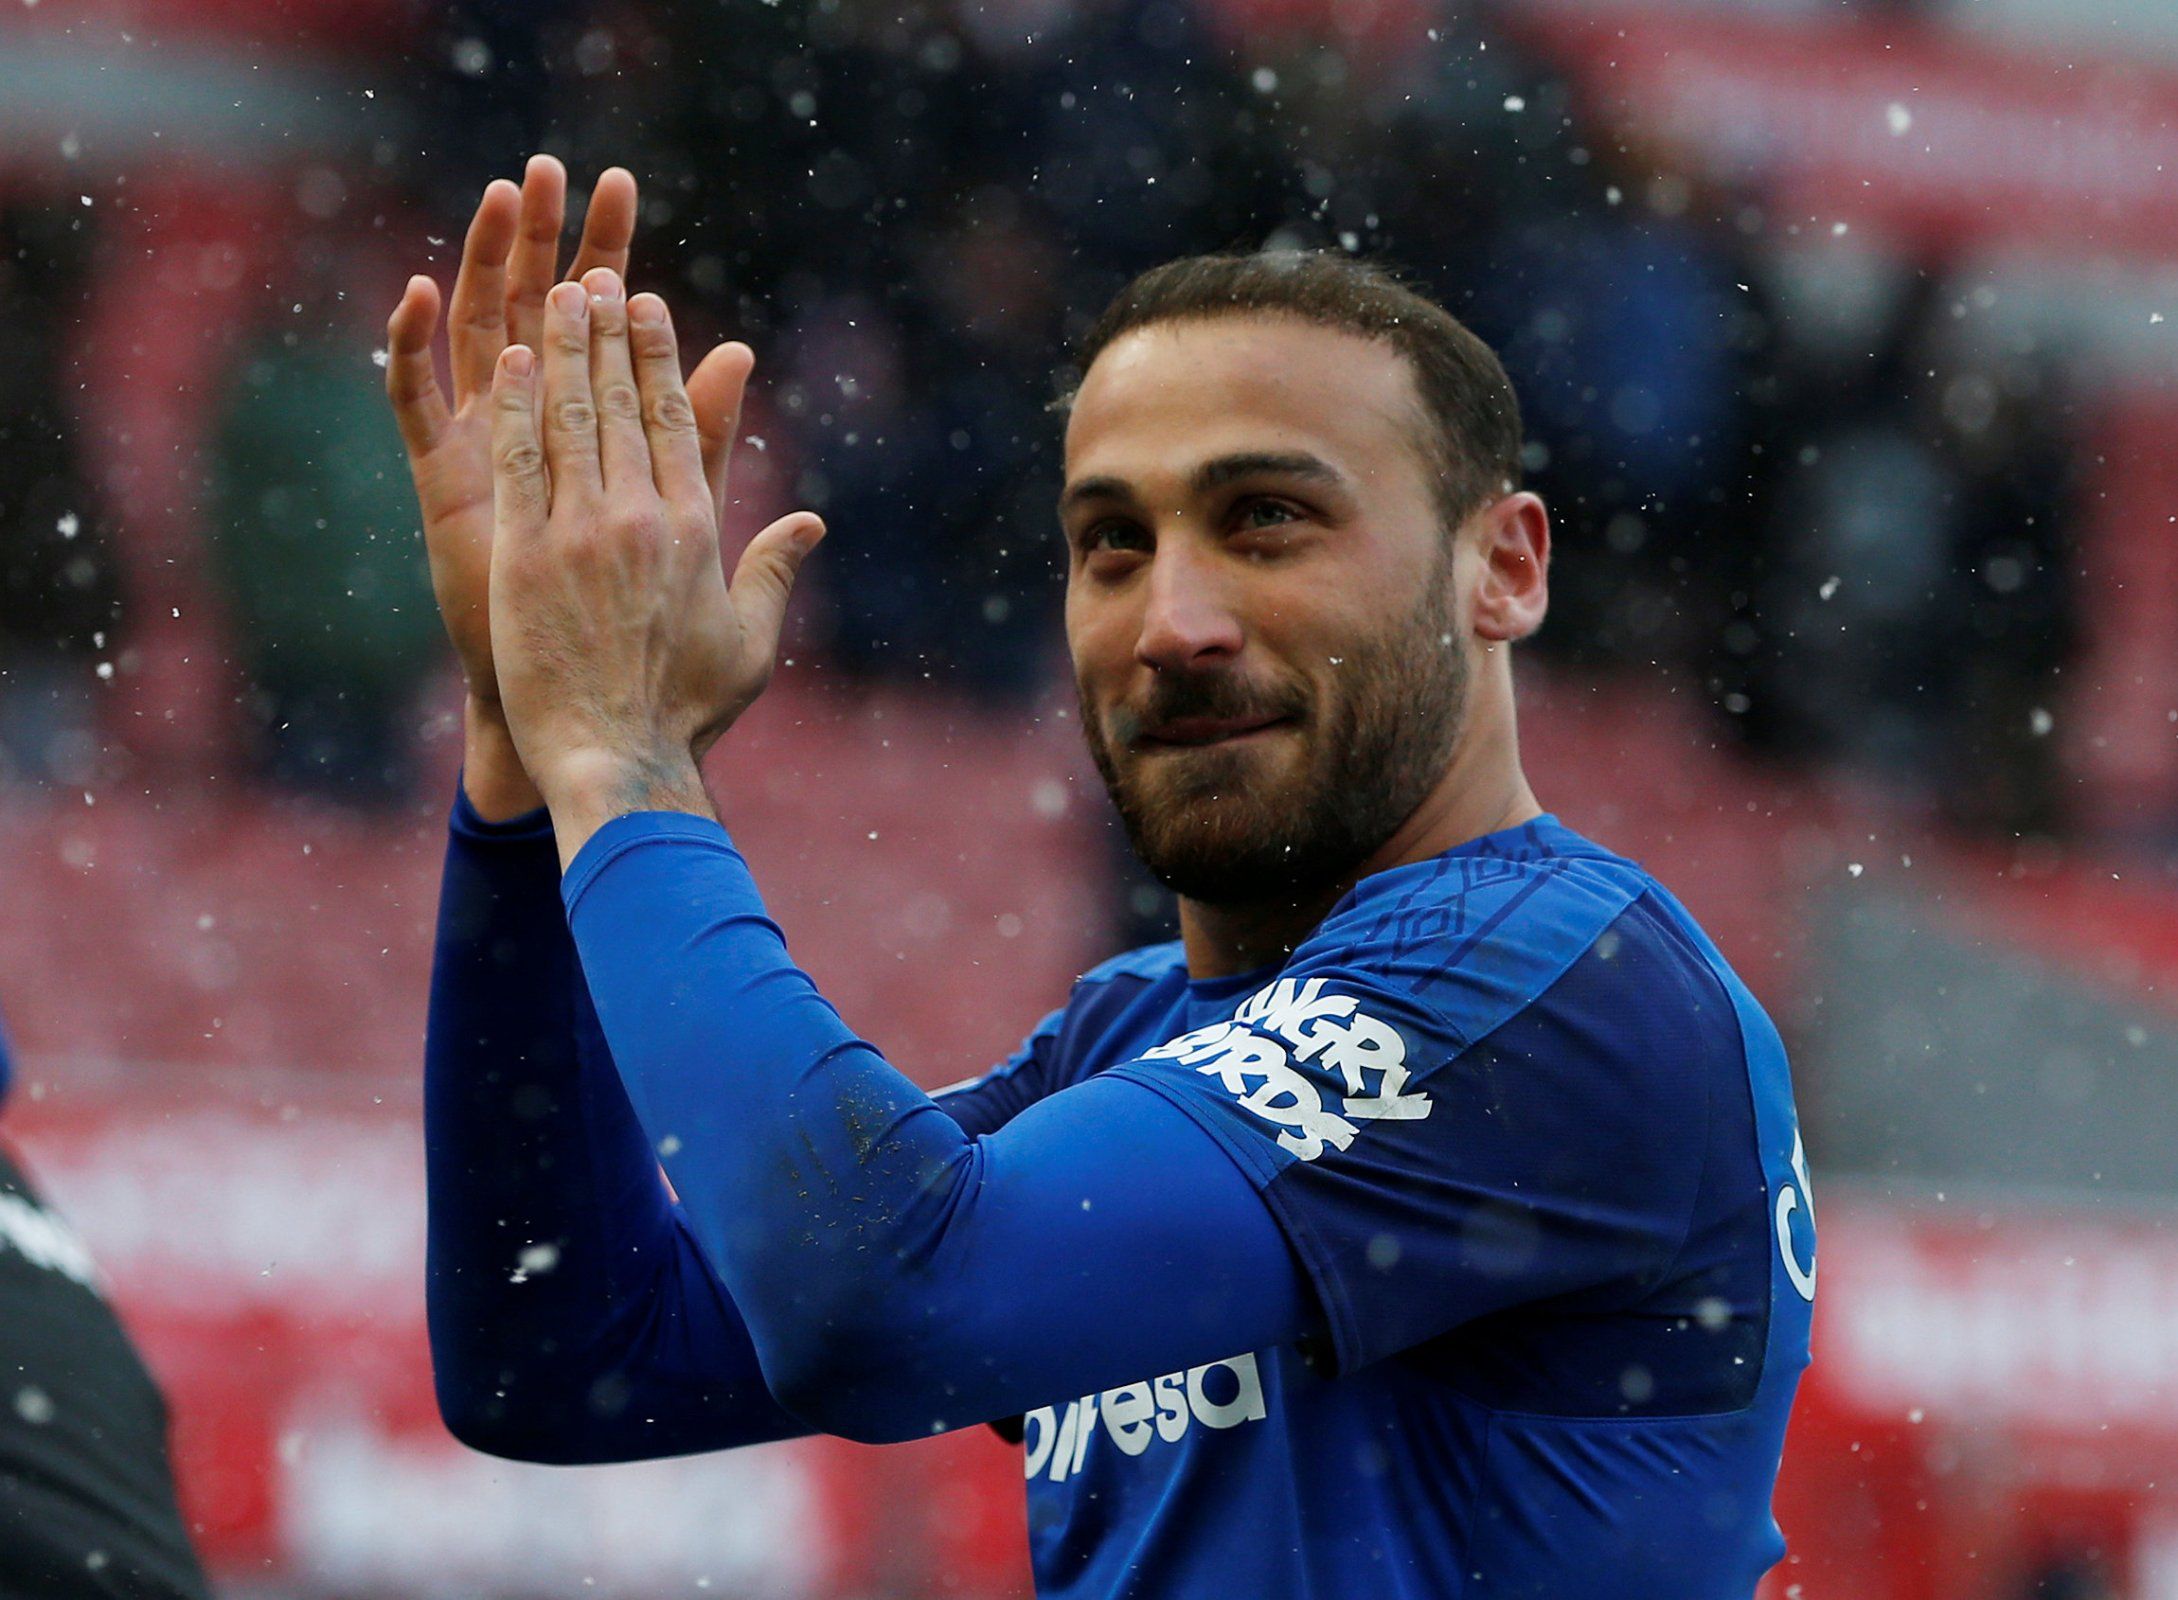 Cenk Tosun applauds the Everton fans following the team's win over Stoke City